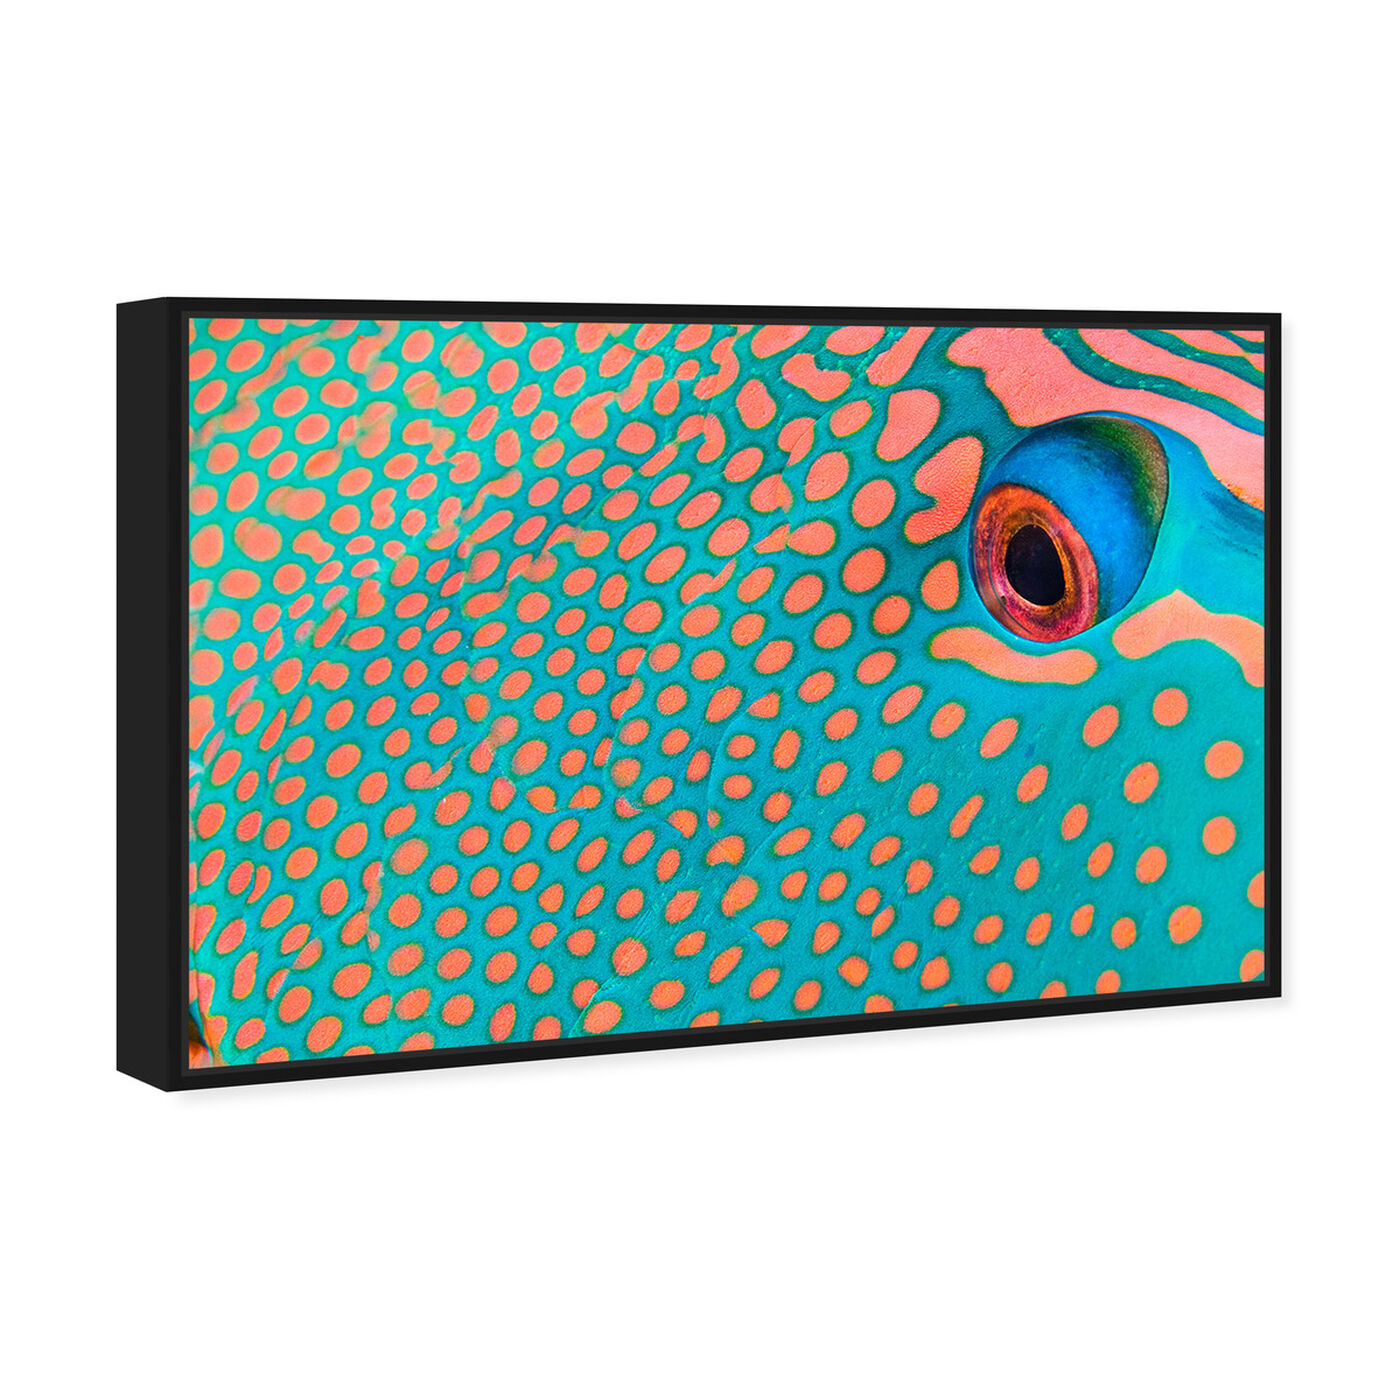 Angled view of Bicolor Parrot Fish II by David Fleetham featuring animals and sea animals art.